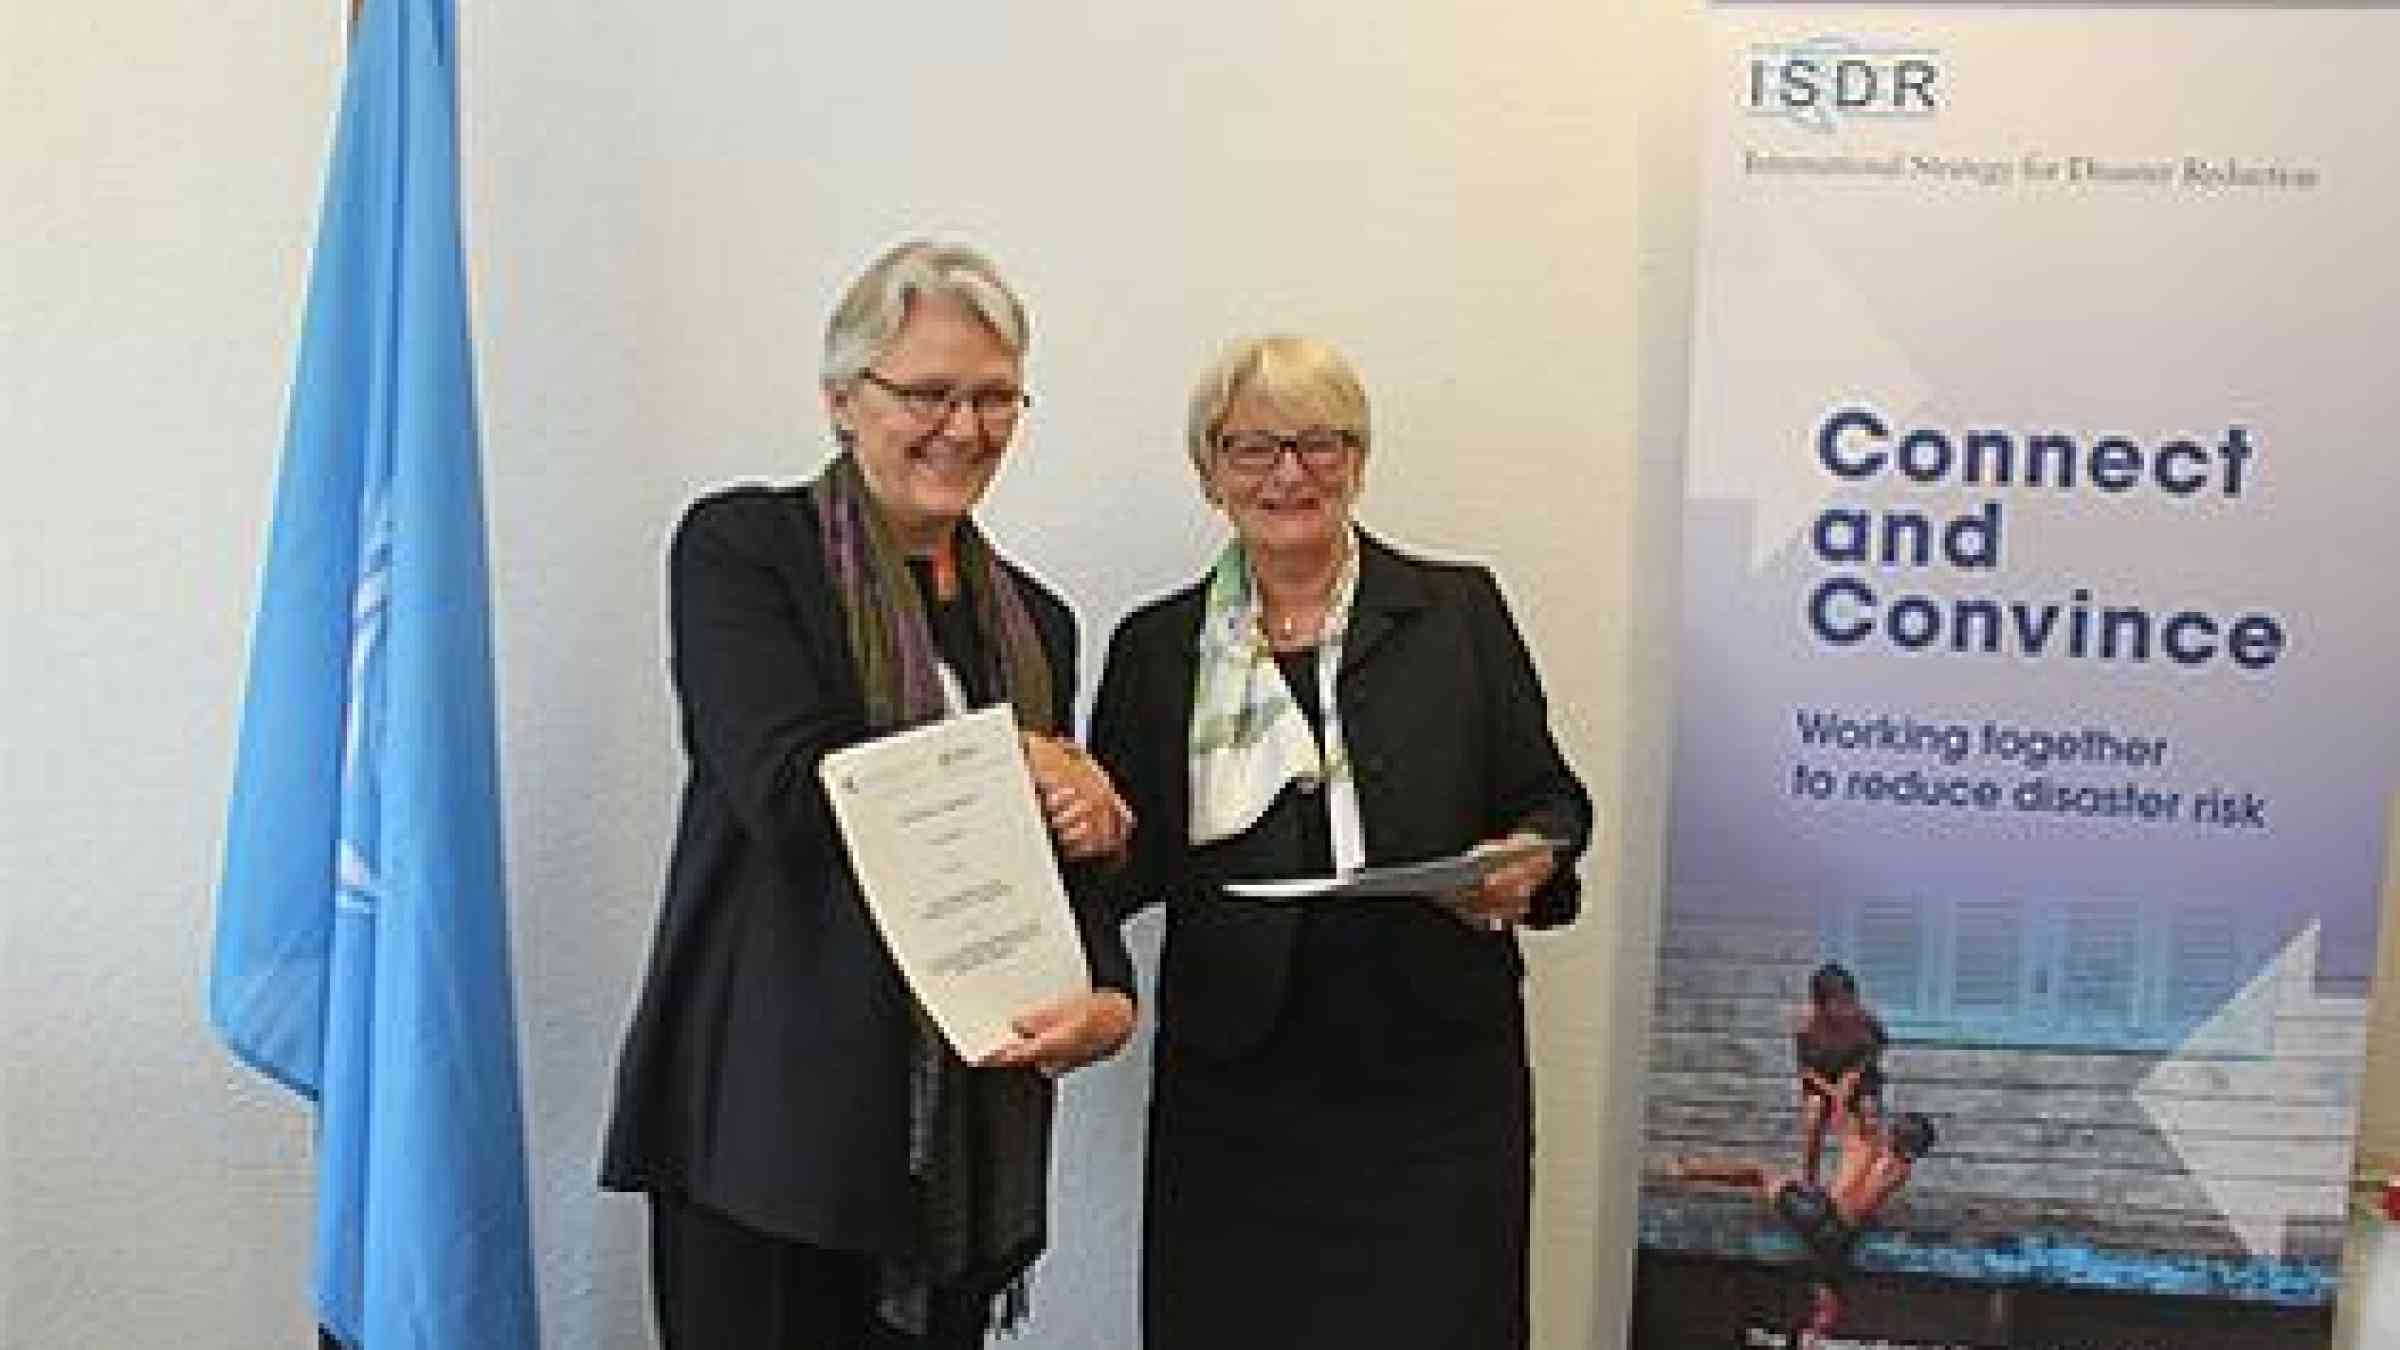 UN Secretary-General’s Special Representative for Disaster Reduction, Margareta Wahlström (left) and Marie-Josée Jacobs, Luxembourg's Minister for Development Cooperation and Humanitarian Affairs (right). Photo by Sophie Torelli Chironi